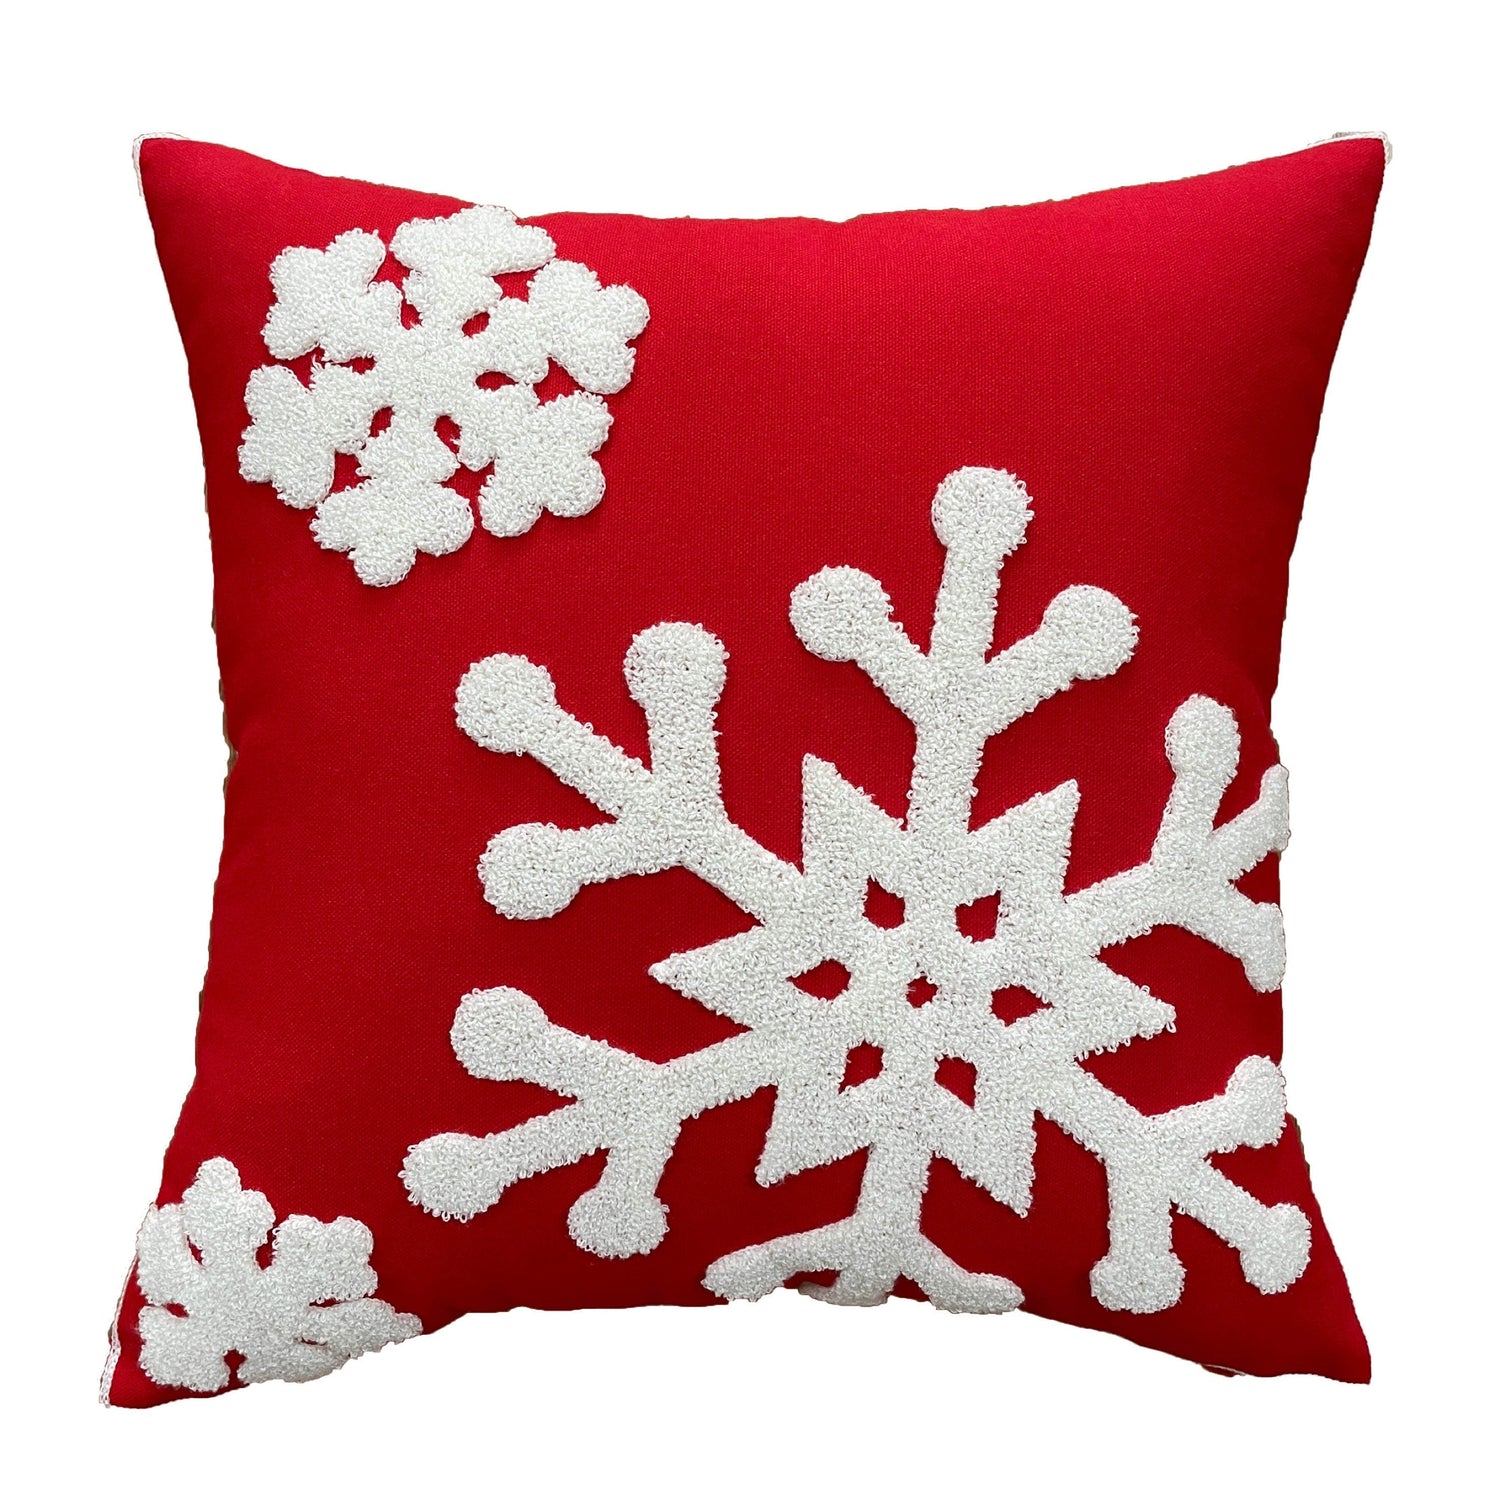 Red Snowflake Embroidered Pillow Cover